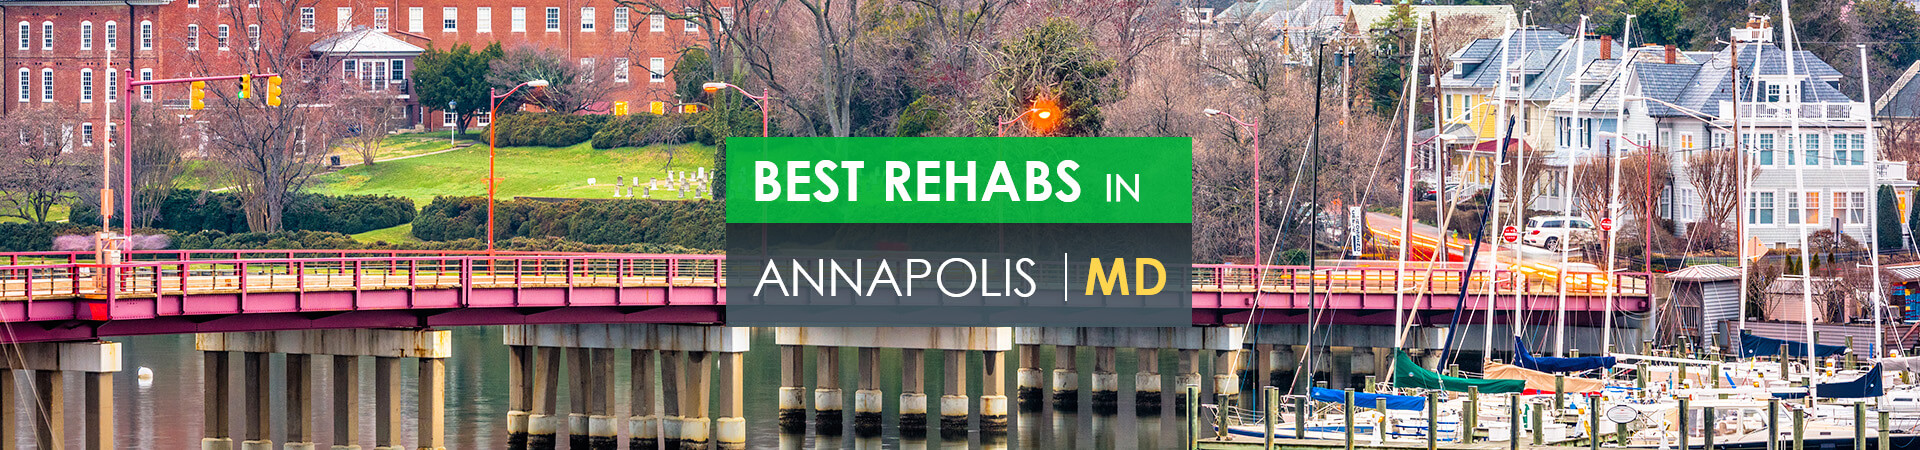 Best rehabs in Annapolis, MD